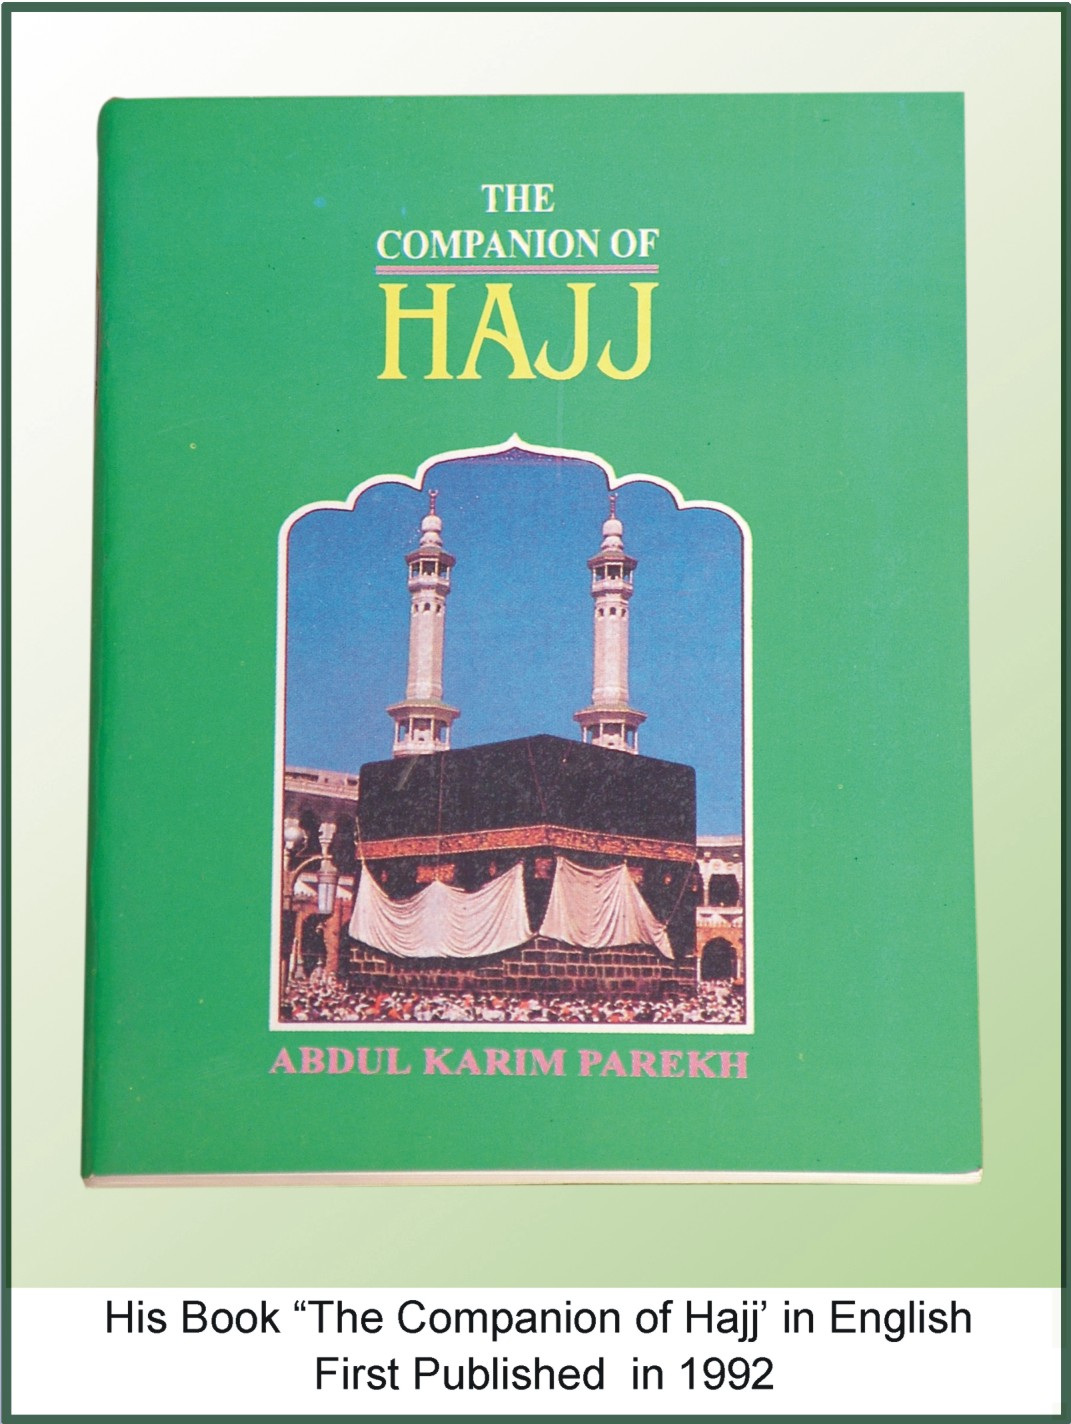 The Companion of Hajj (English) First Published in 1992